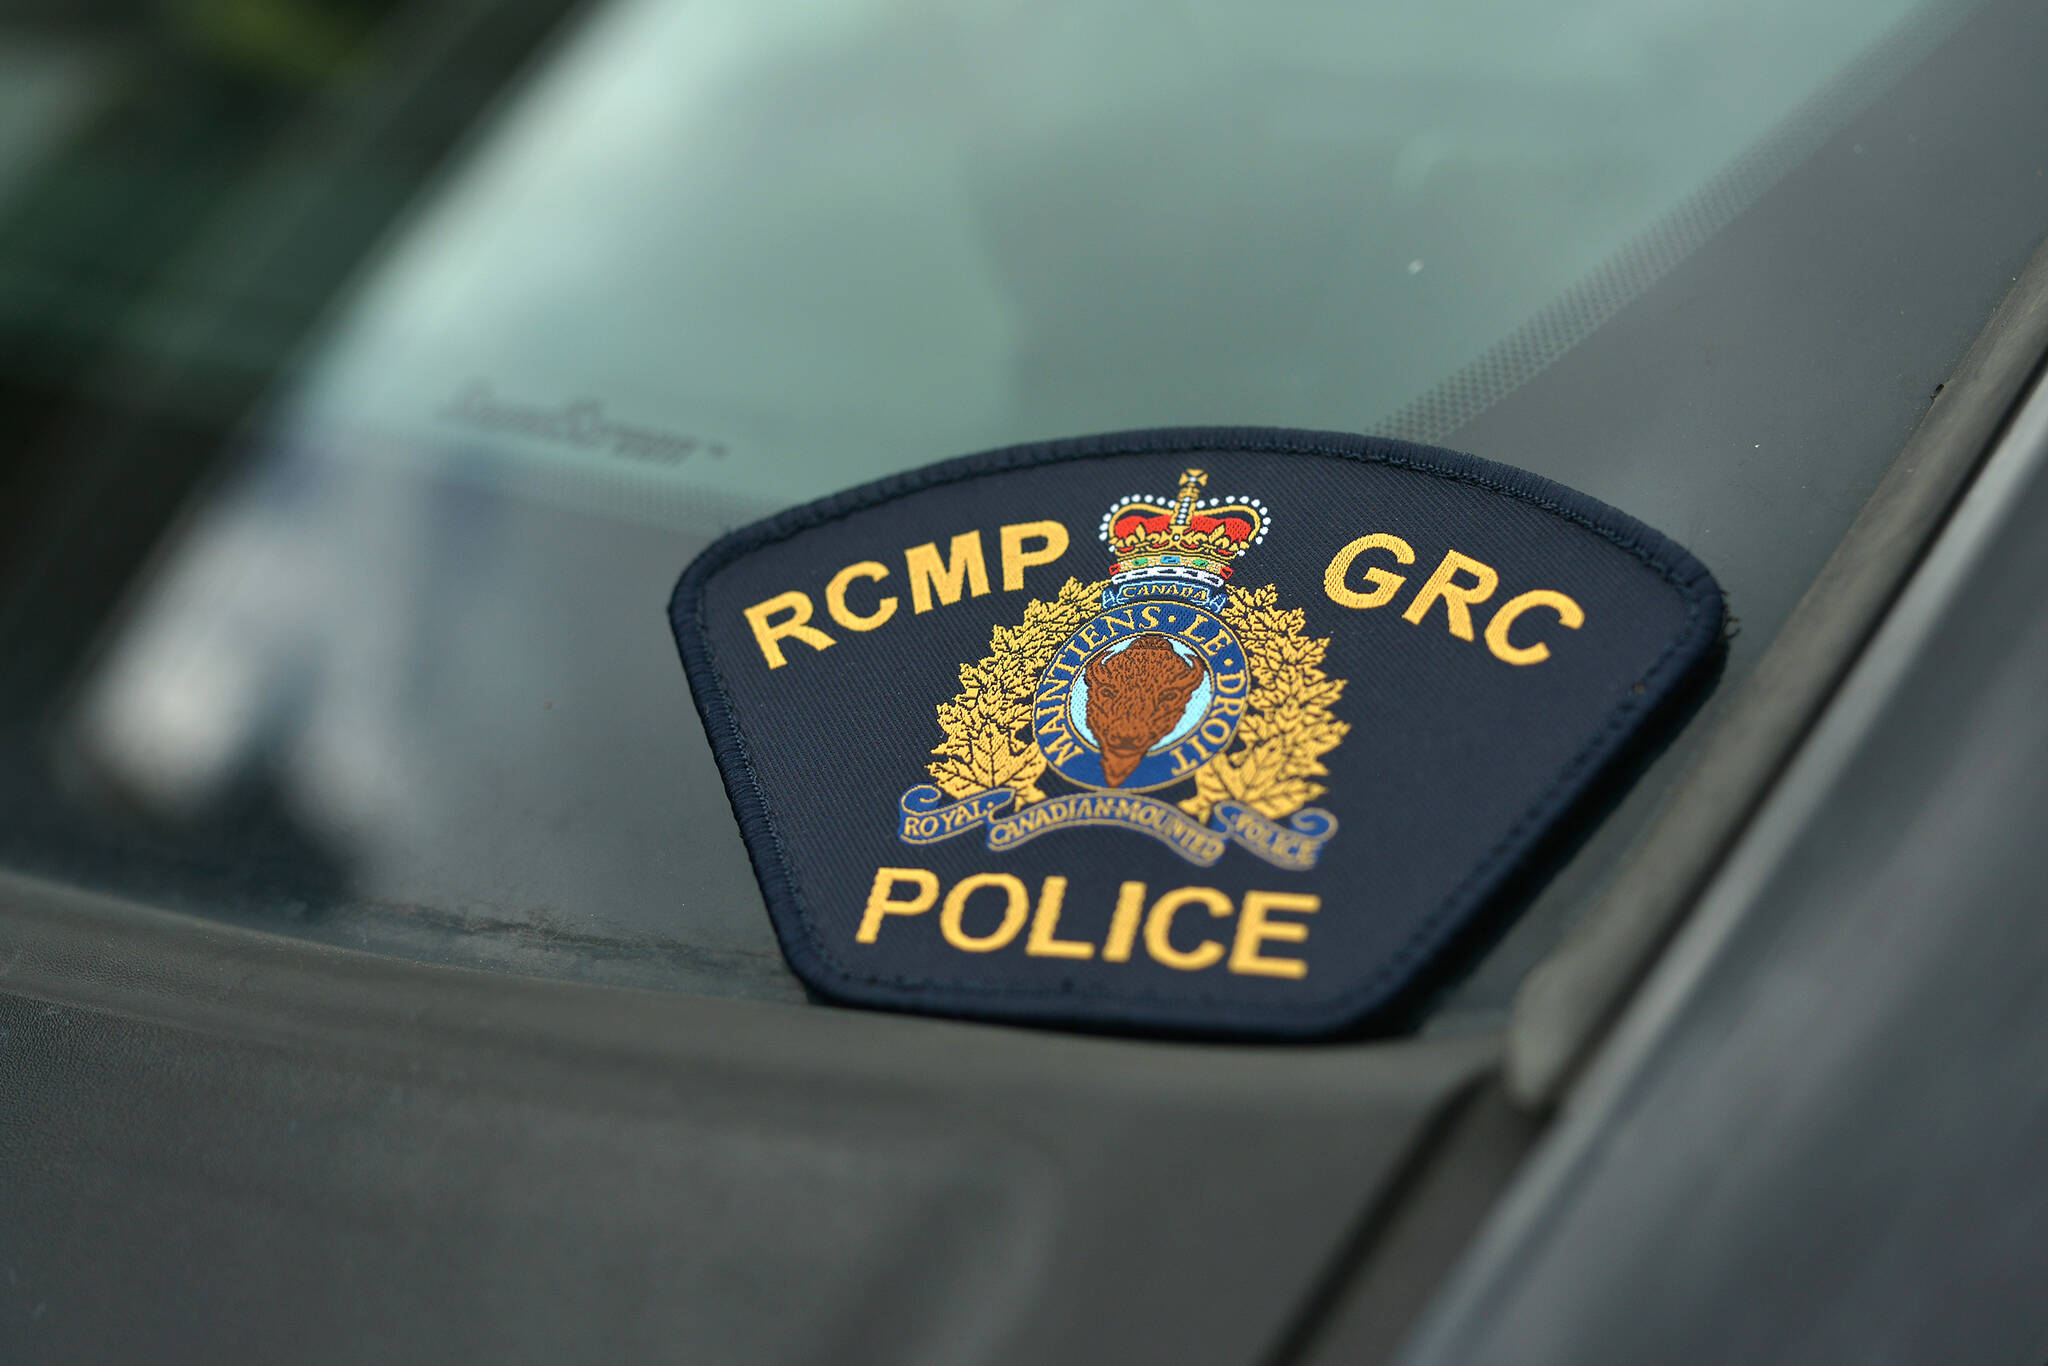 A fatal crash involving four youths on jet skis in Skaha Lake in the Okanagan is being investigated by the RCMP. (File photo)